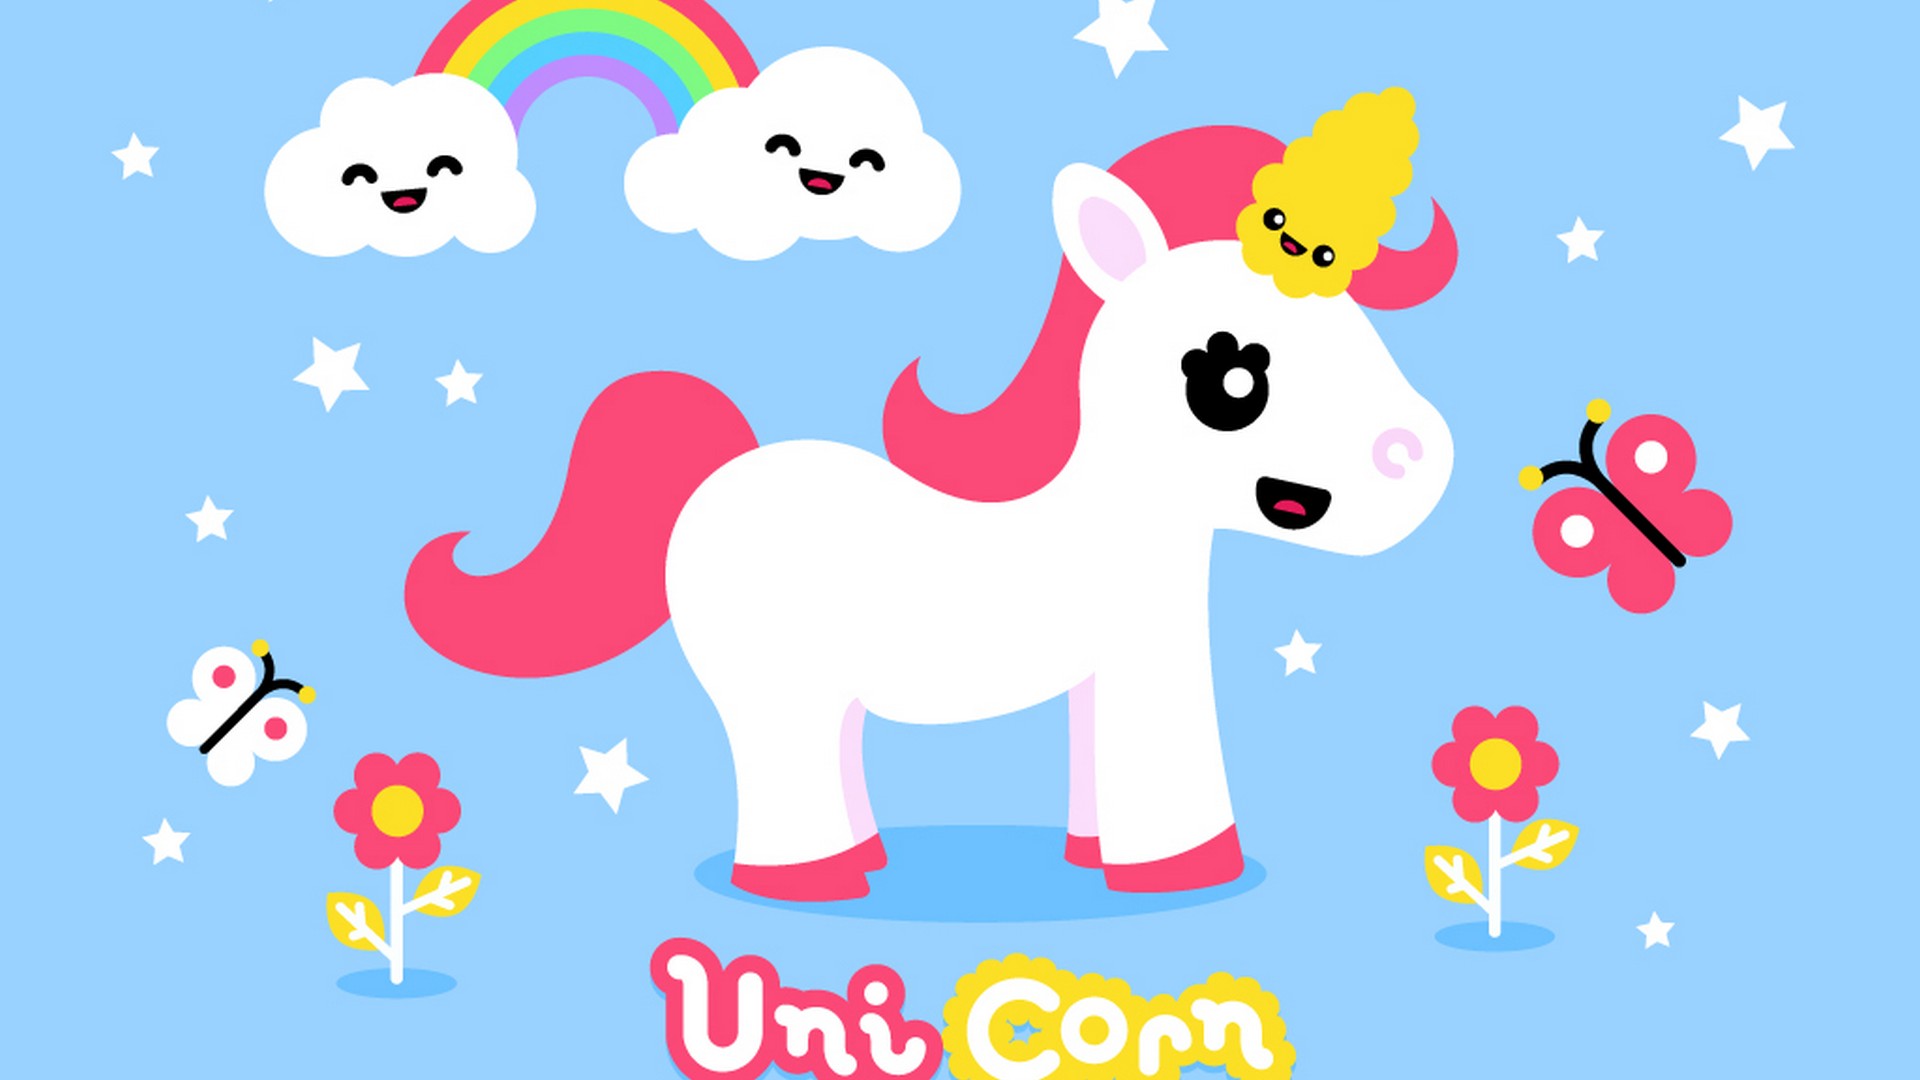 HD Cute Unicorn Backgrounds with high-resolution 1920x1080 pixel. You can use this wallpaper for your Windows and Mac OS computers as well as your Android and iPhone smartphones